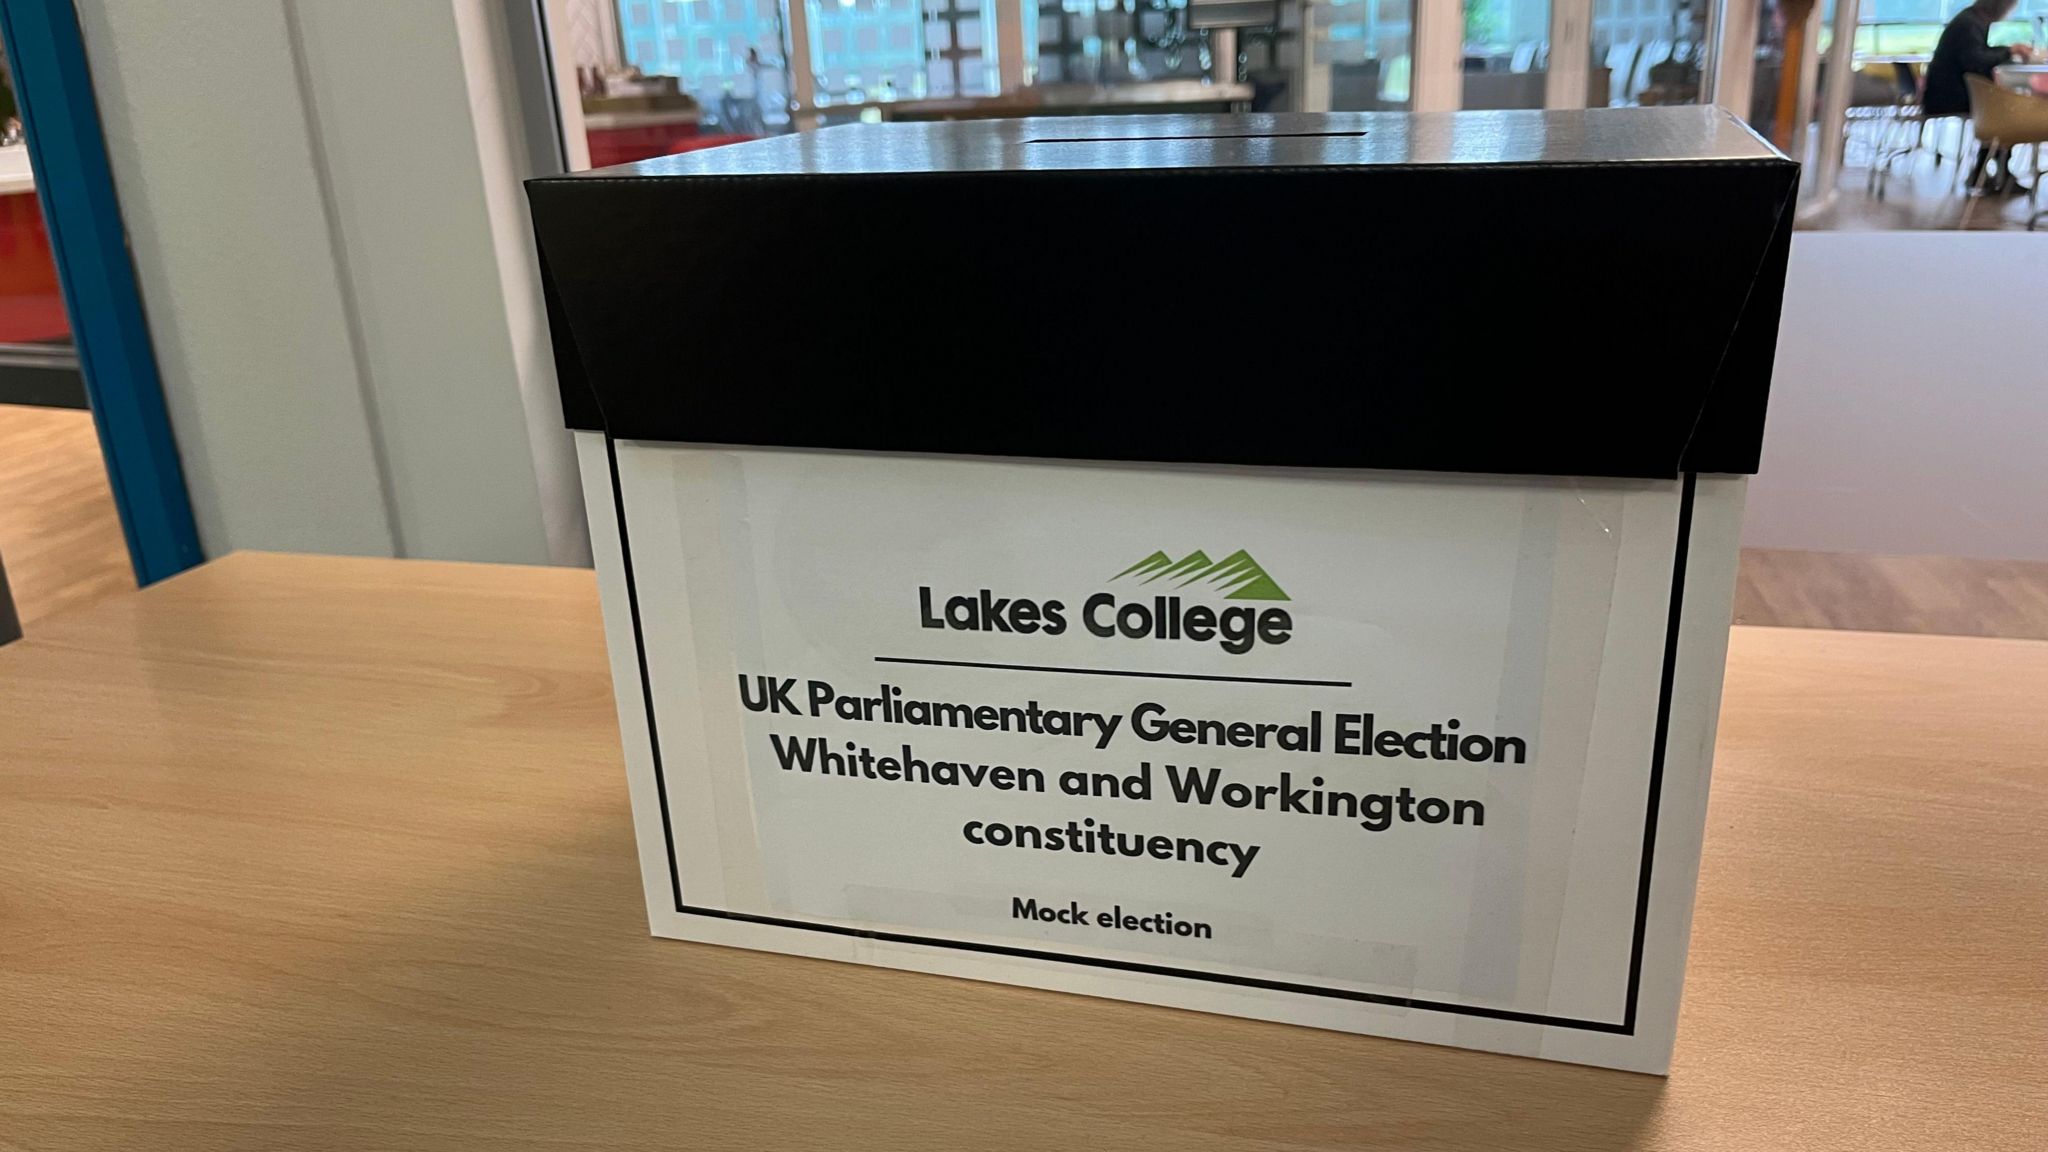 A mock ballot box used at Lakes College to show students what to expect when voting